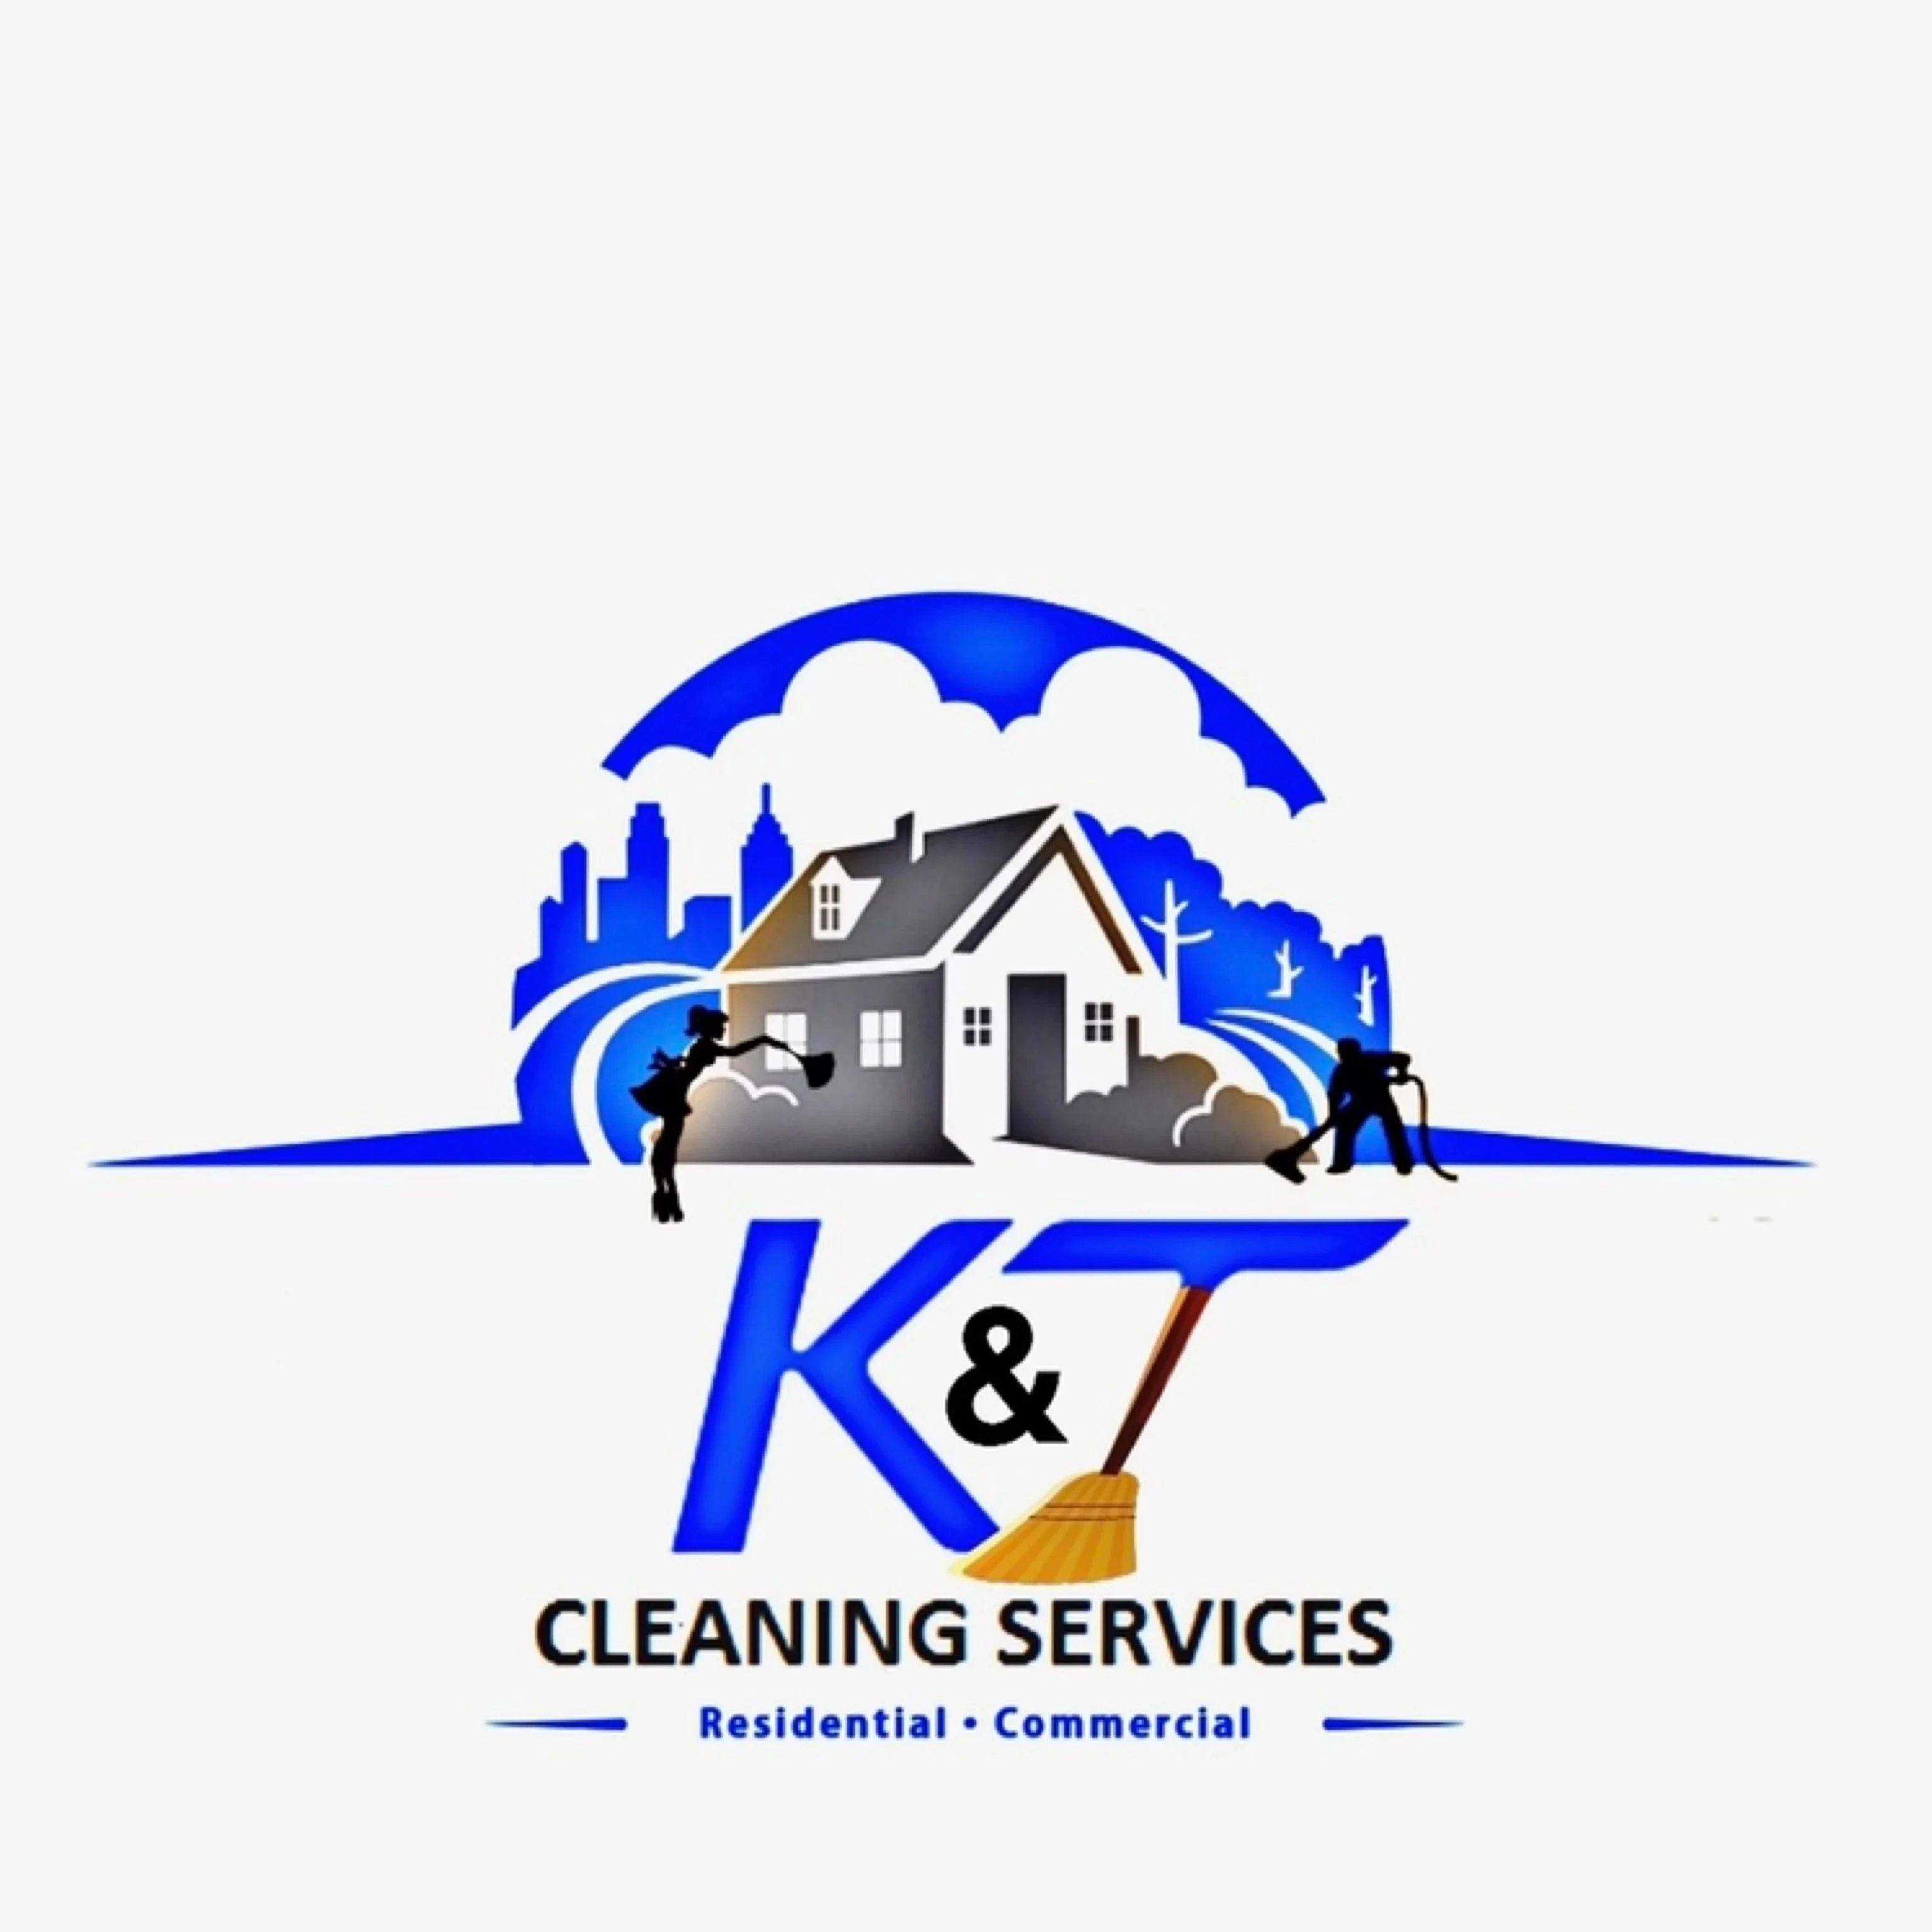 K&T Cleaning Services